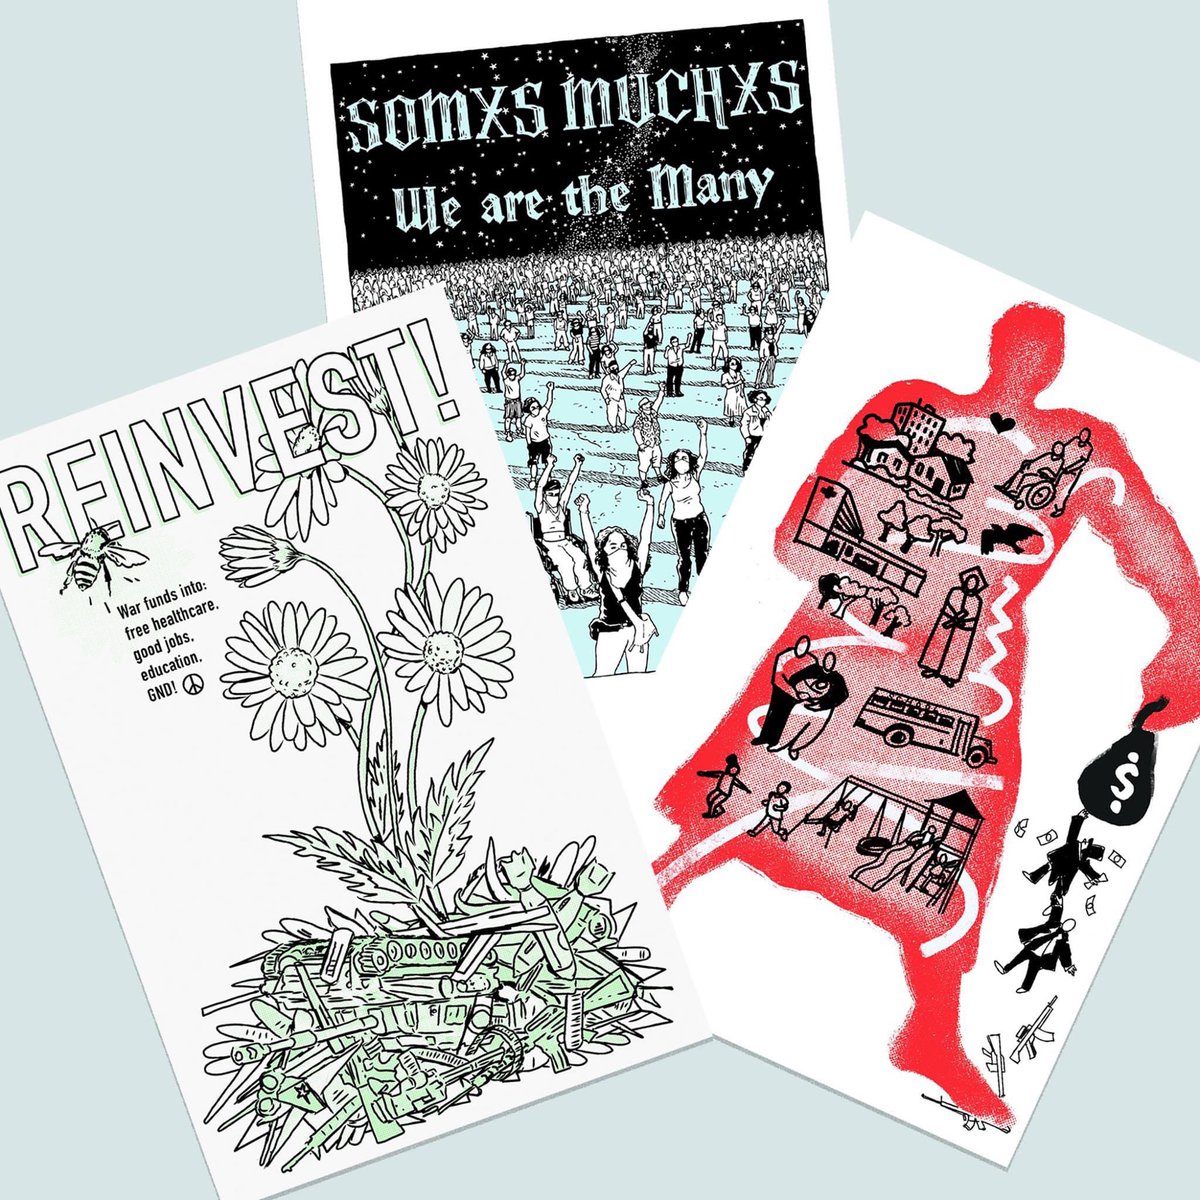 Invest in training for youth anti-militarism leaders! Donate $50+ to  @wearedissenters & get a special edition pre-release screen prints (1 of 3) from their DE-MIL-I-TA-RISE portfolio via  @Justseeds. $100+ to get all three! Donate here:  https://actionnetwork.org/fundraising/sustain-dissent-invest-in-training-for-youth-anti-militarism-leaders